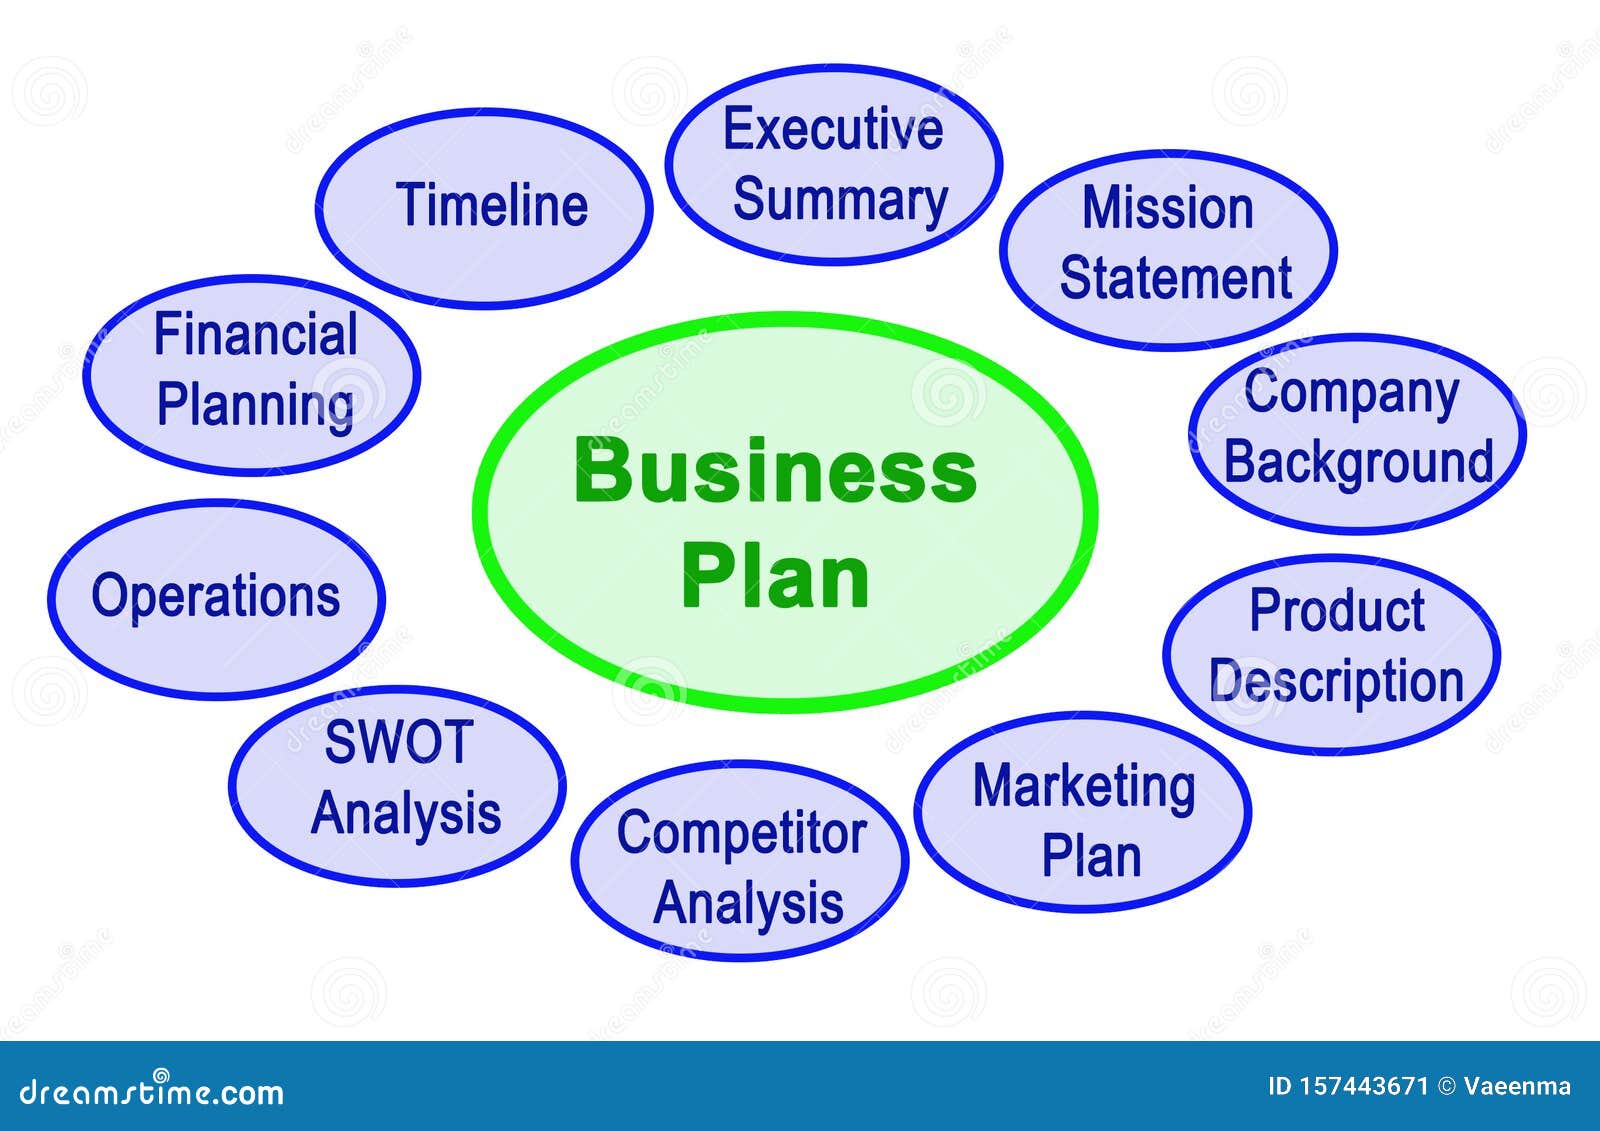 describe the key components of a business plan